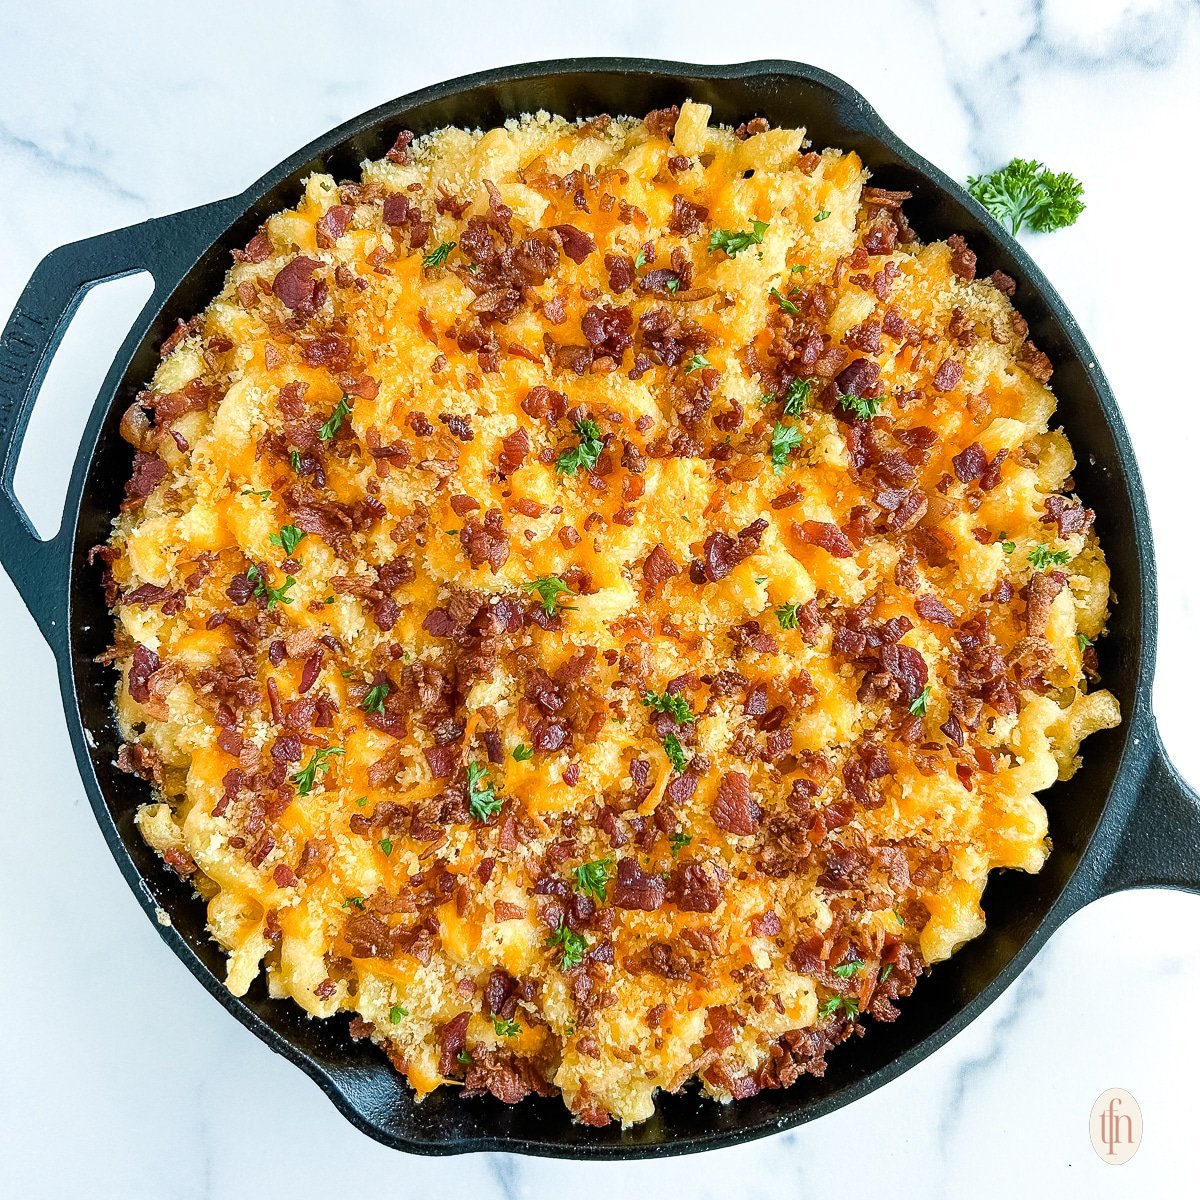 Skillet of smoked mac and cheese with bacon.